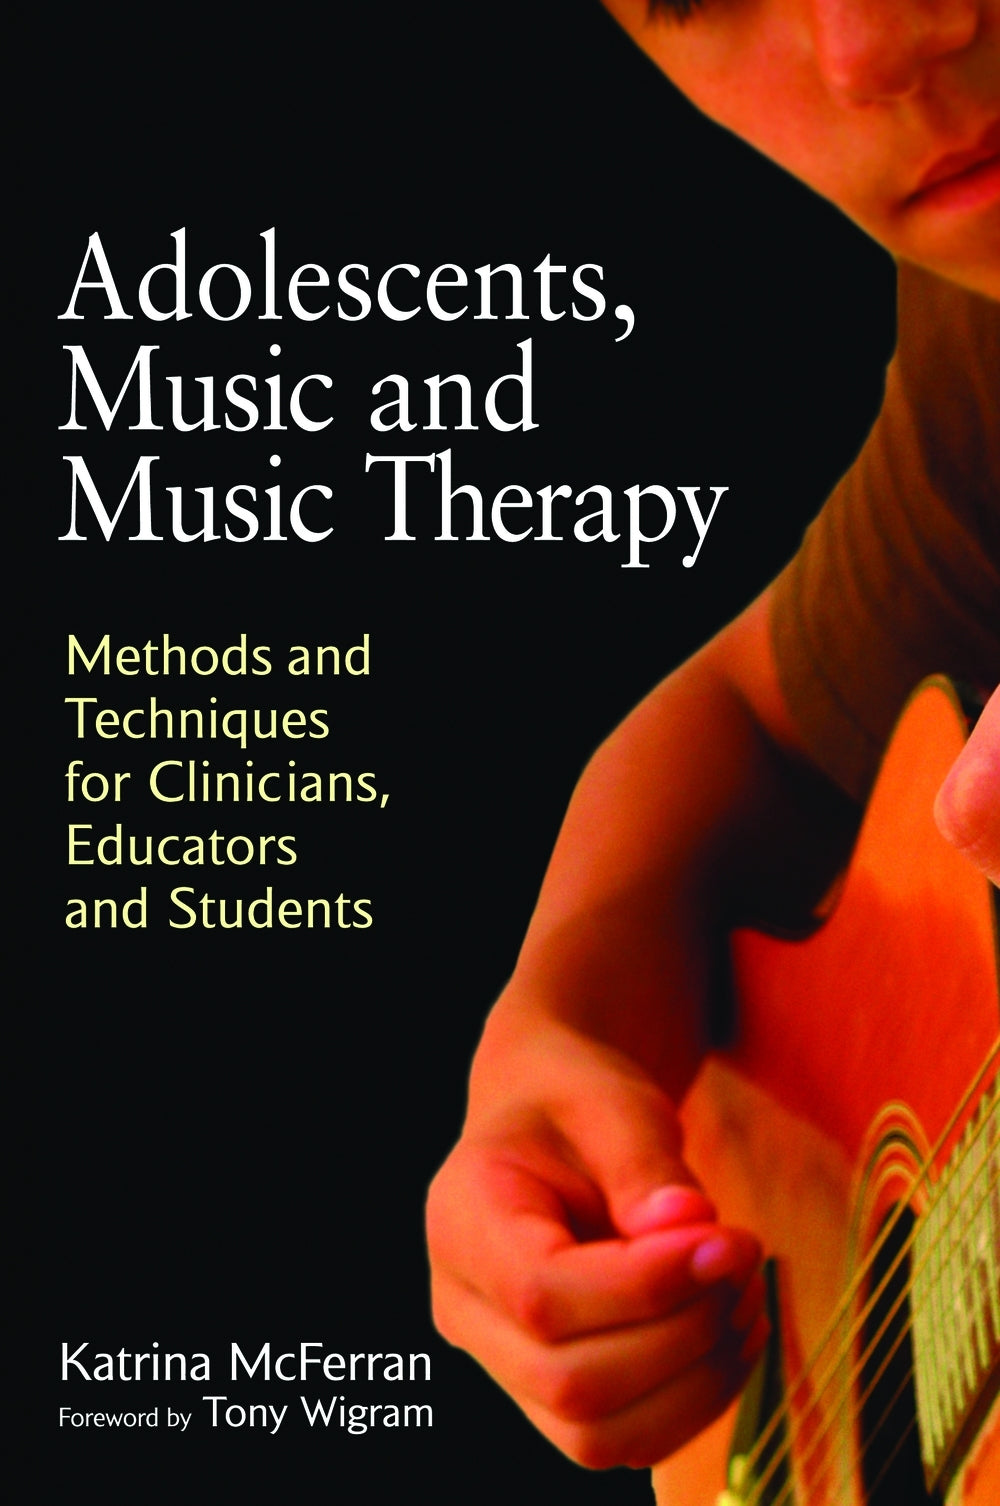 Adolescents, Music and Music Therapy by Katrina McFerran